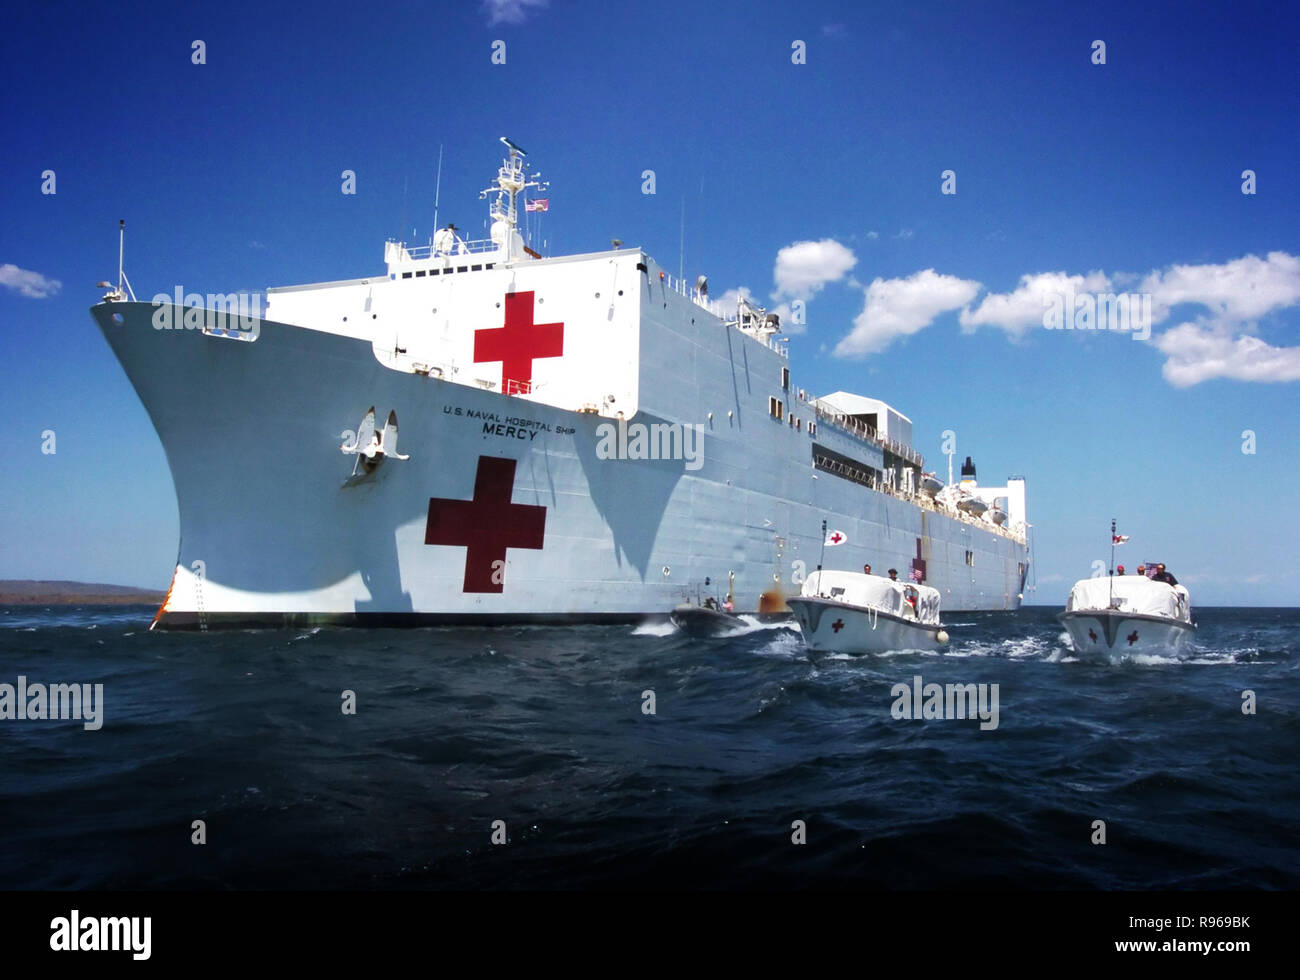 The hospital ship USNS Mercy (T AH 19) moors off the coast of the island of Kupang in West Timor, Indonesia, as Mercy's two transport boats shuttle patients and crew to and from shore.   DoD photo by Chief Petty Officer Edward G. Martens, U.S. Navy. Stock Photo